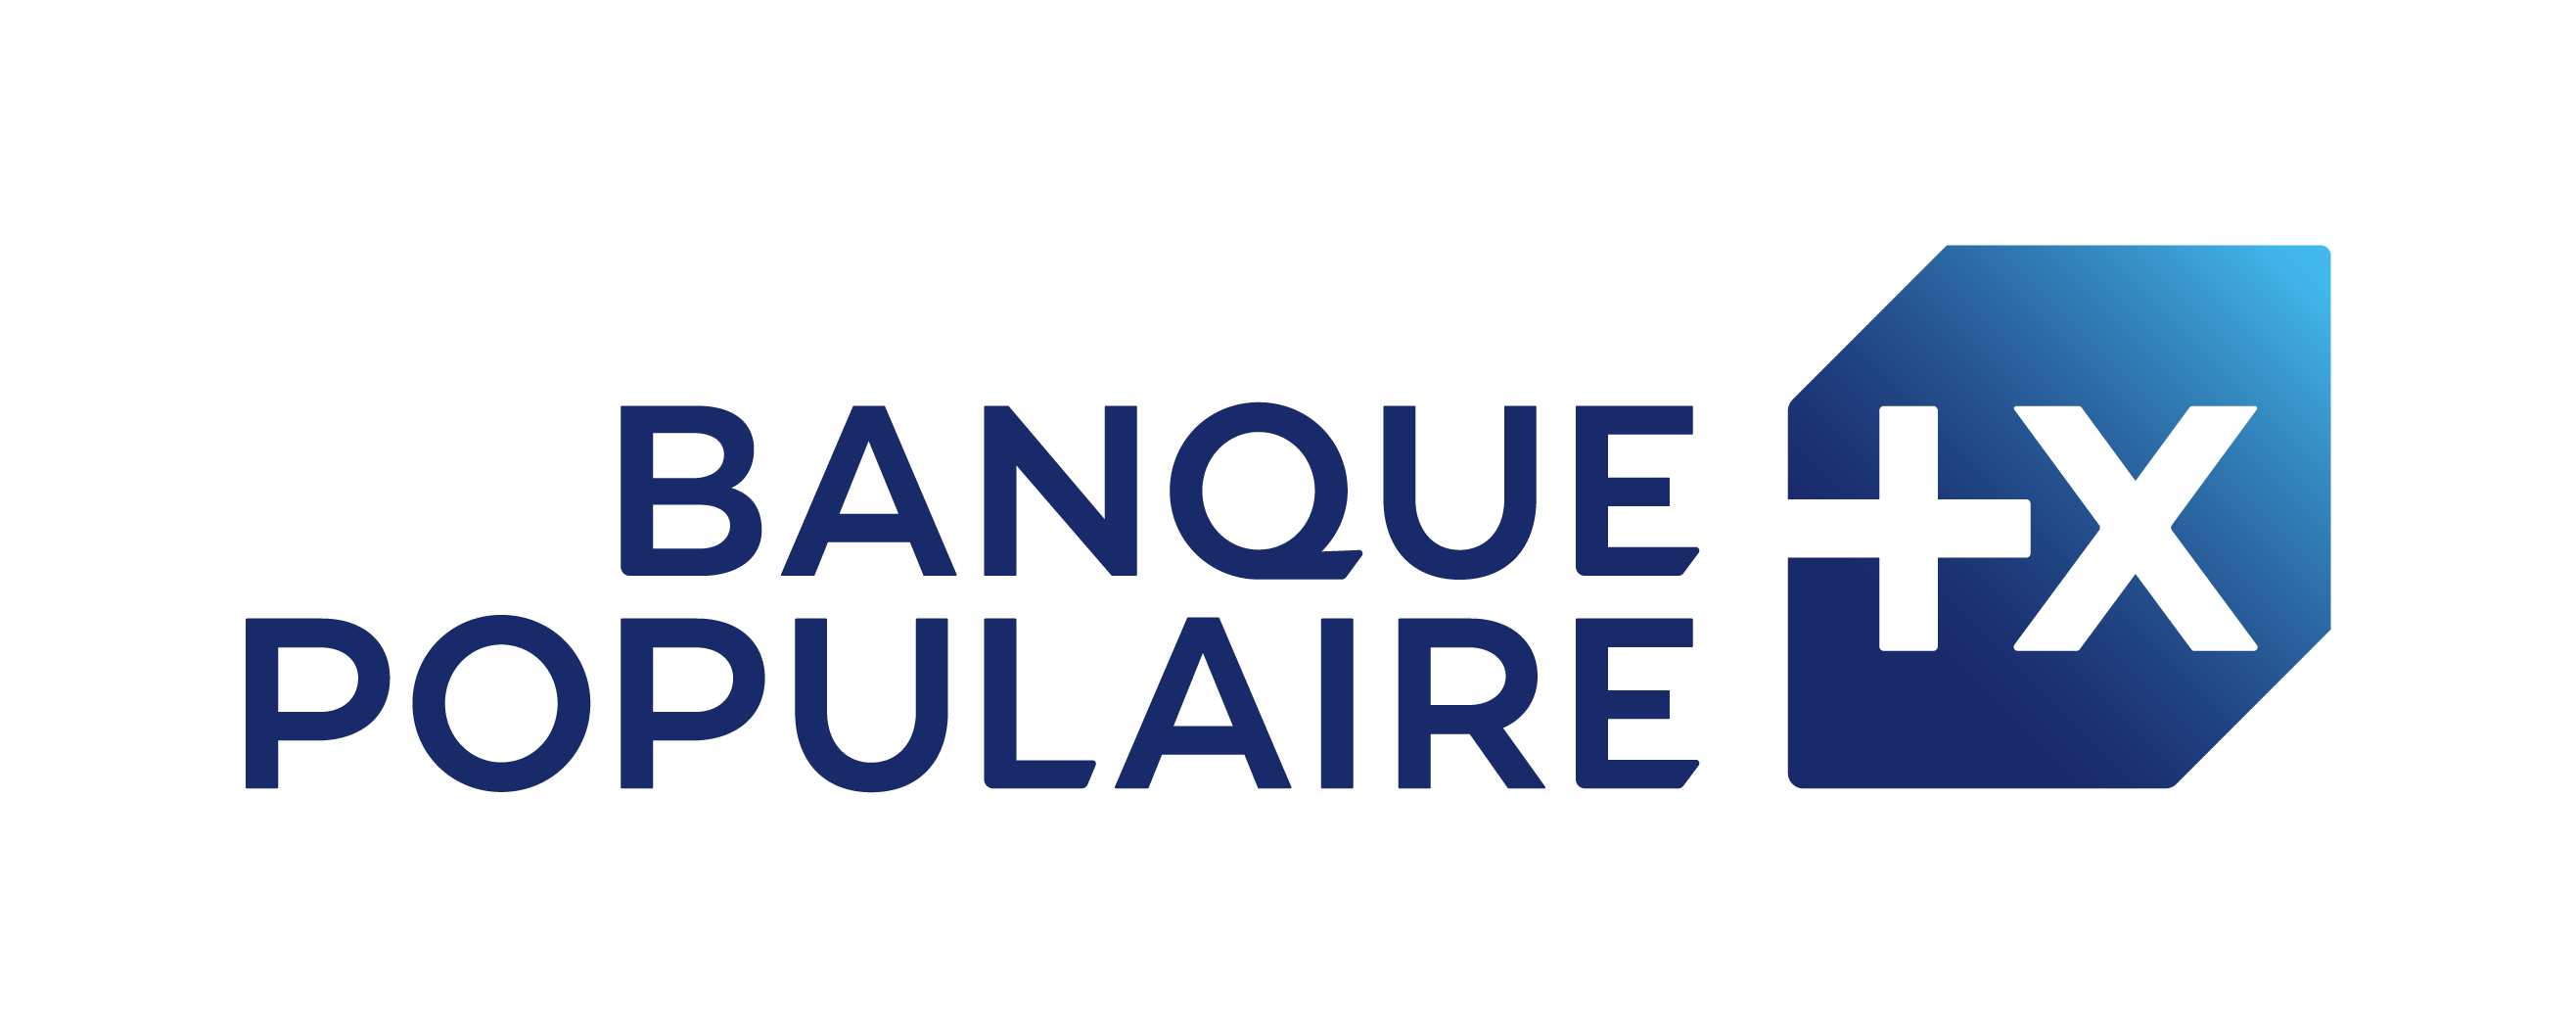 Banque Populaire - BPCE Group logo